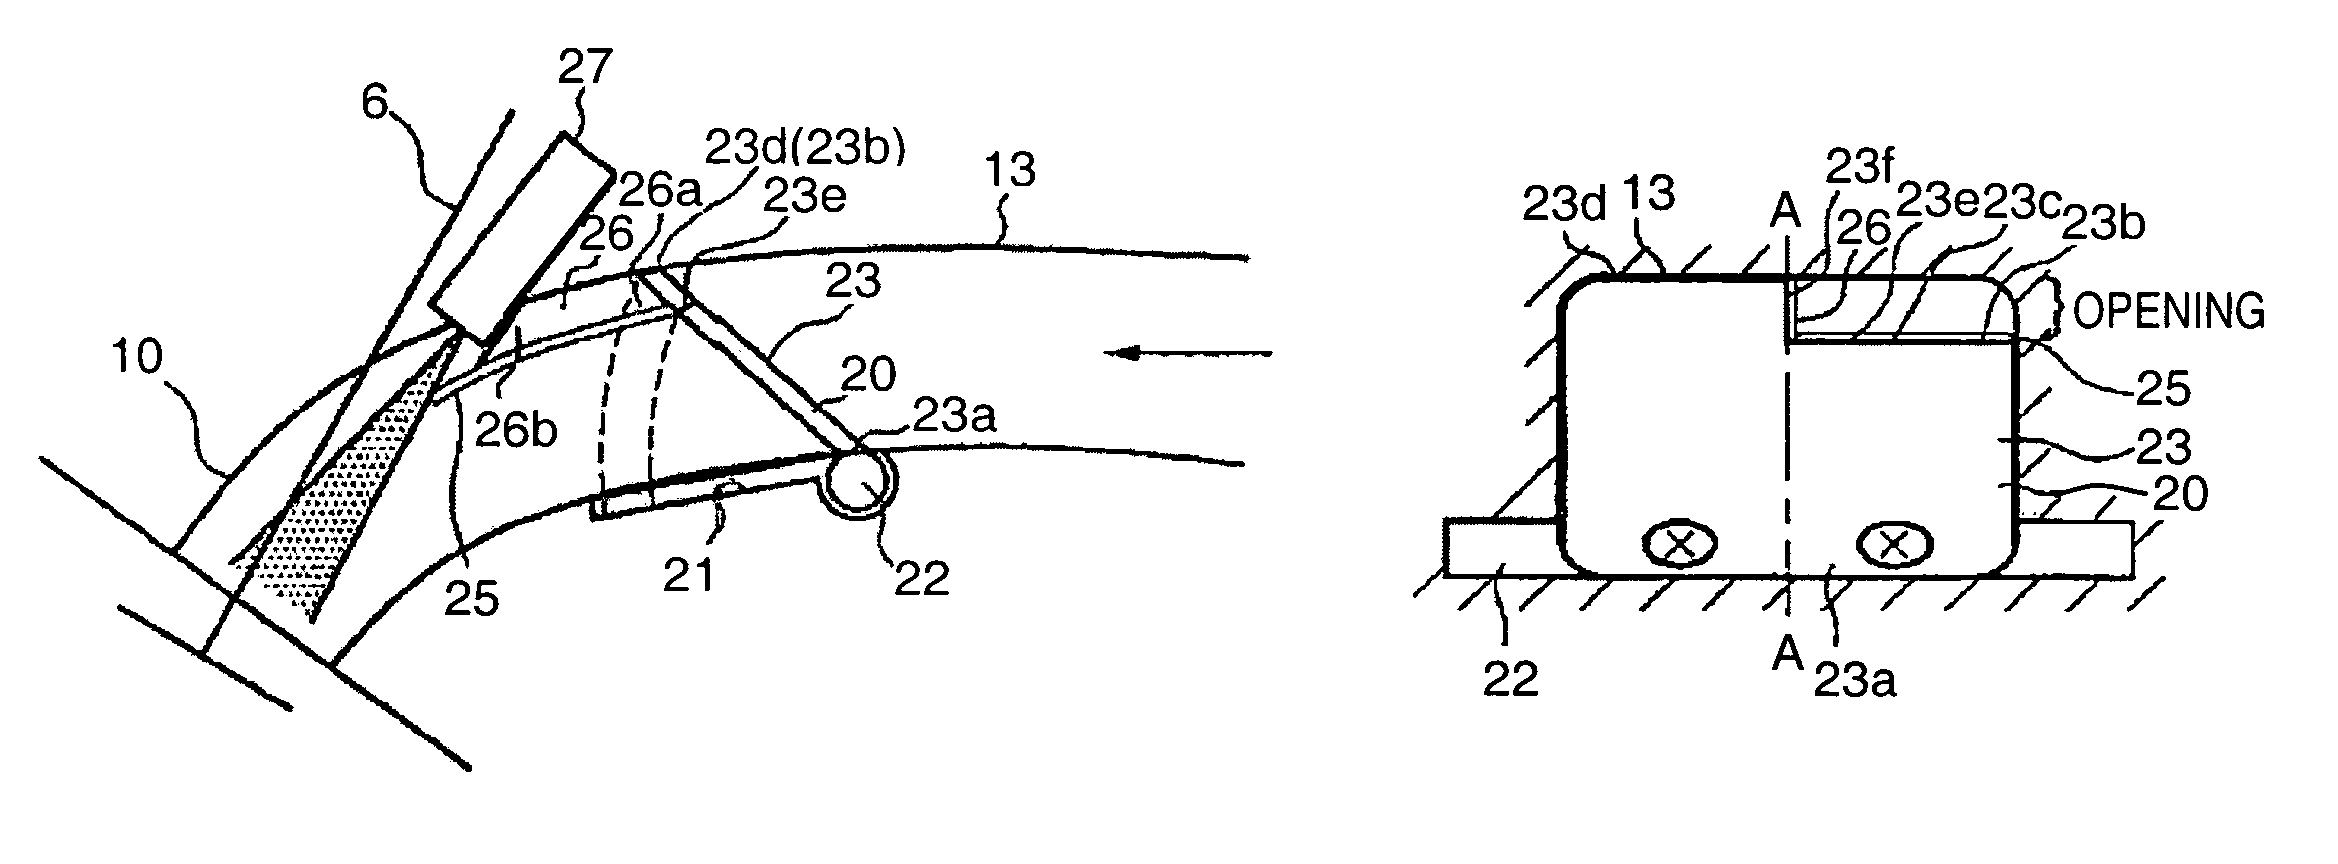 Internal combustion engine air intake structure